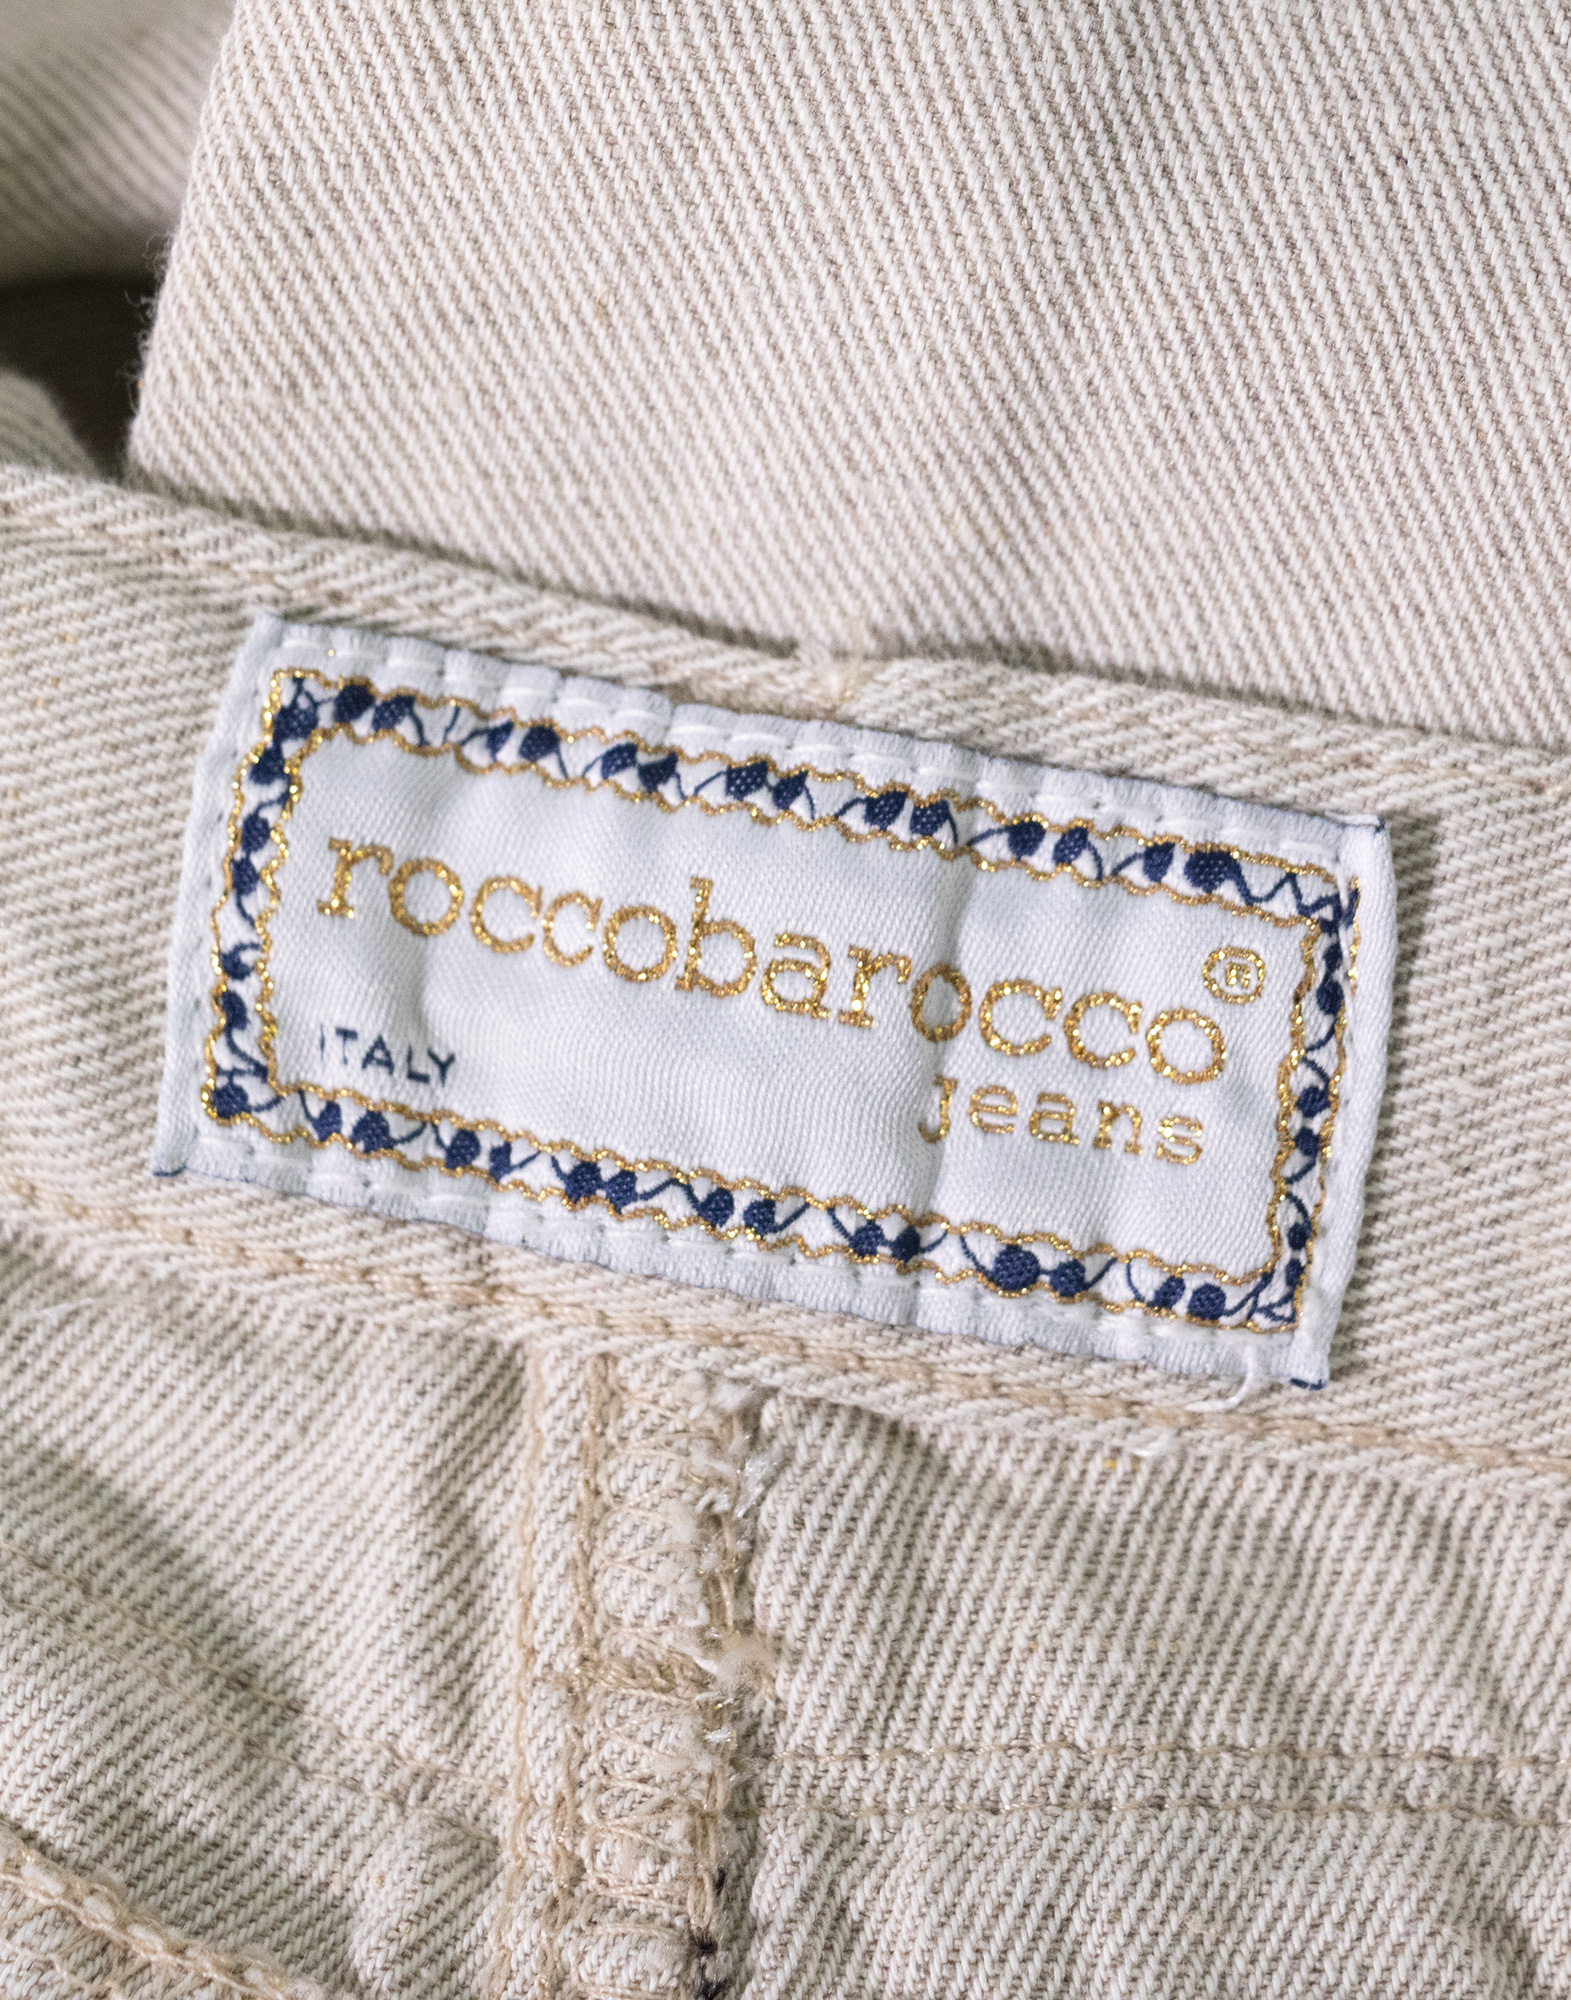 Roccobarocco - Linen and cotton blazer and trousers suit